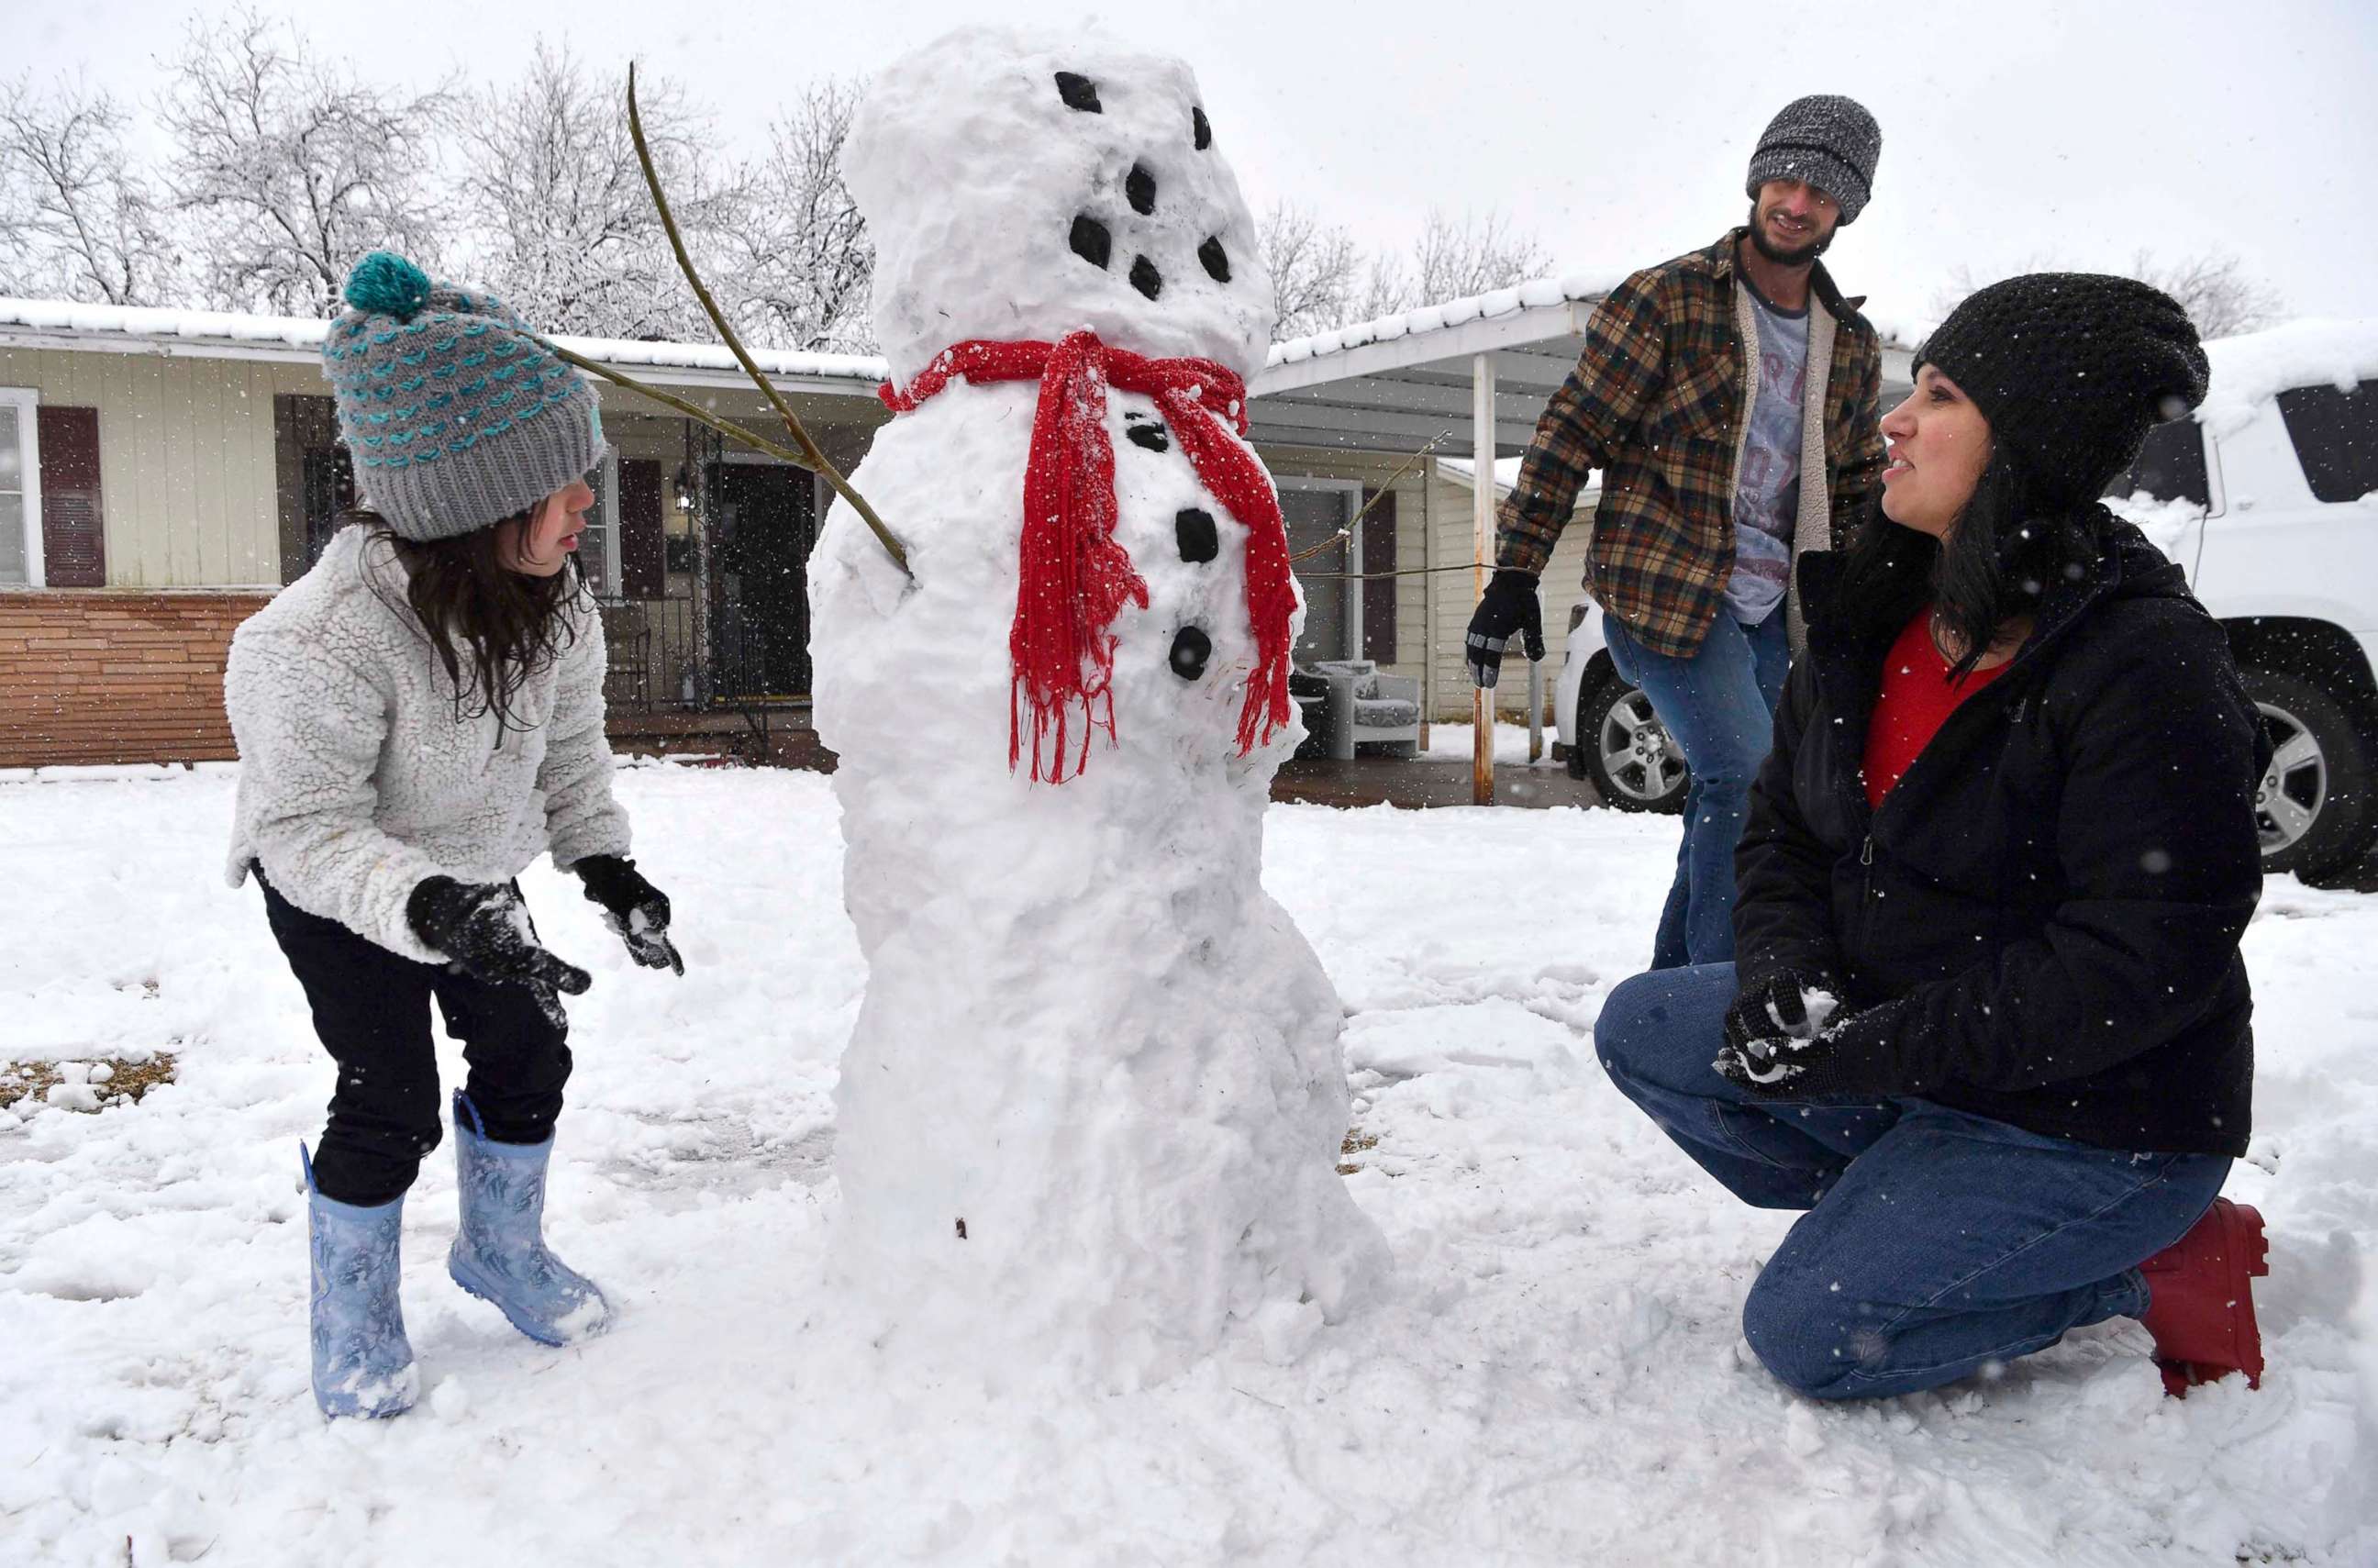 PHOTO: Taylor Young, 5, inspects her handiwork as she builds a snowman with her parents Paul and Brittney during Sunday's morning snowfall in Abilene, Texas Jan. 10, 2021.